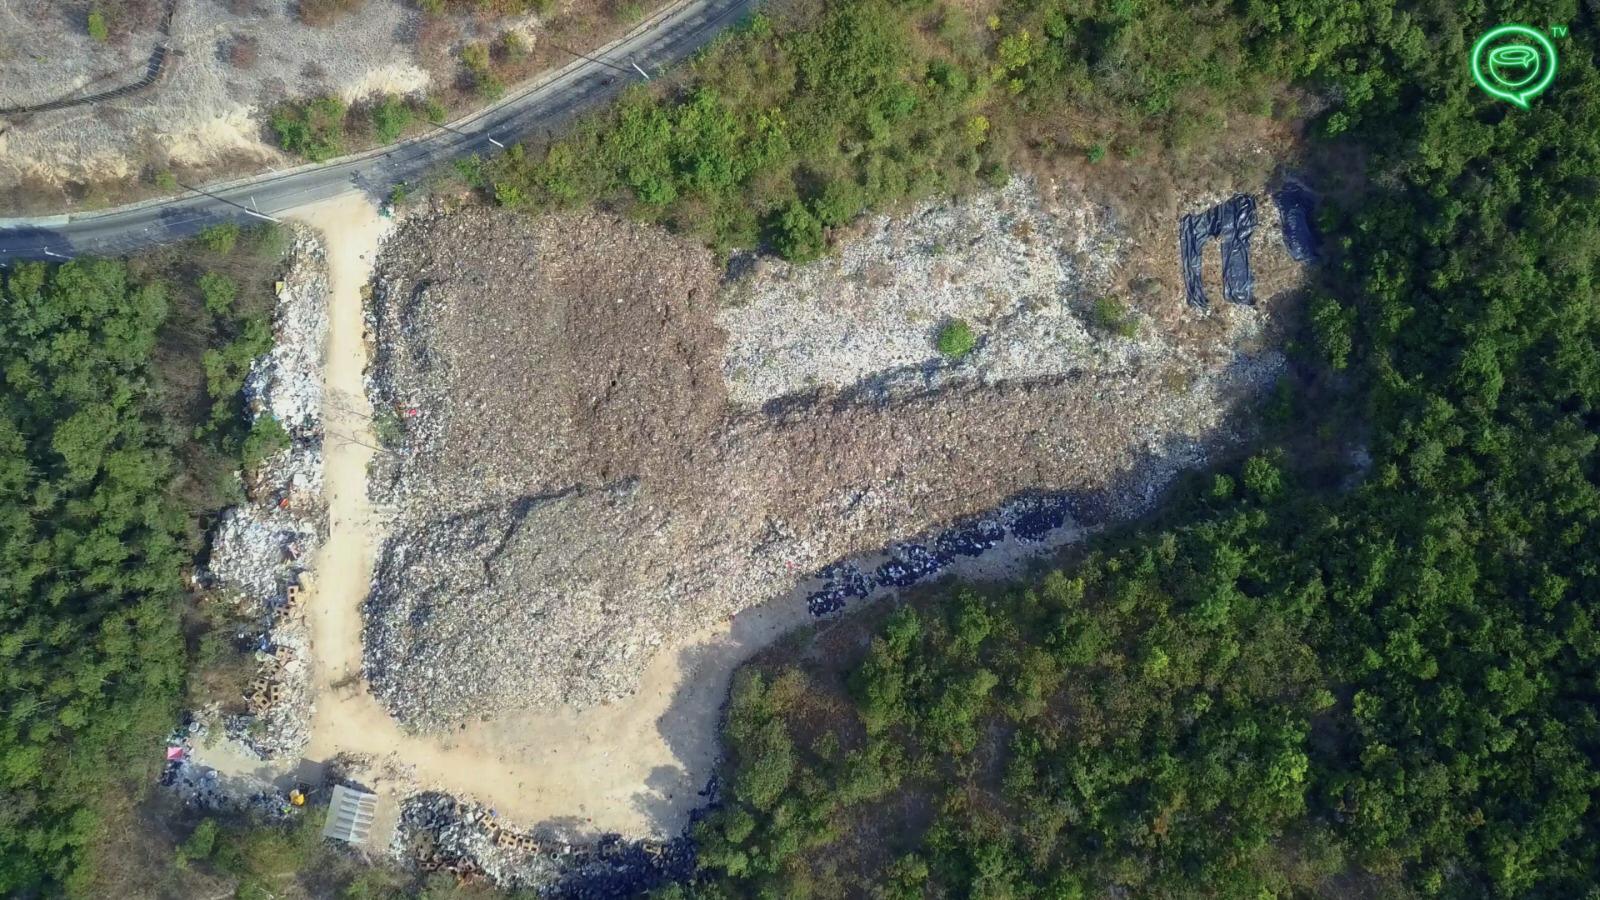 Does the shape of Koh Lan's landfill remind you of anything? Screenshot: Coconuts TV